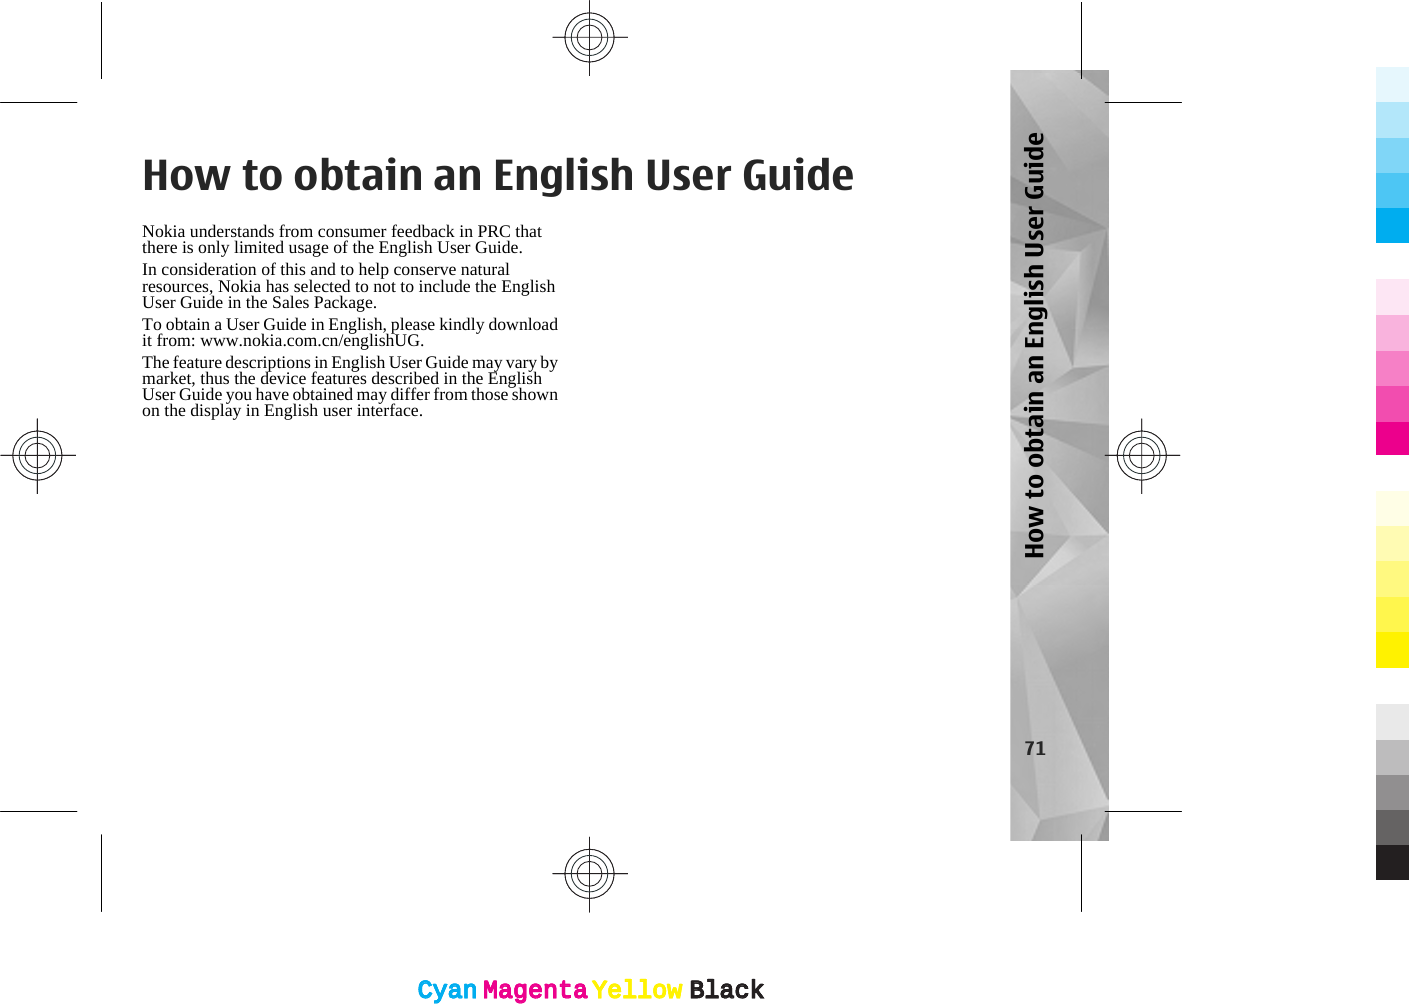 How to obtain an English User GuideNokia understands from consumer feedback in PRC thatthere is only limited usage of the English User Guide.In consideration of this and to help conserve naturalresources, Nokia has selected to not to include the EnglishUser Guide in the Sales Package.To obtain a User Guide in English, please kindly downloadit from: www.nokia.com.cn/englishUG.The feature descriptions in English User Guide may vary bymarket, thus the device features described in the EnglishUser Guide you have obtained may differ from those shownon the display in English user interface.71How to obtain an English User GuideCyanCyanMagentaMagentaYellowYellowBlackBlackCyanCyanMagentaMagentaYellowYellowBlackBlack